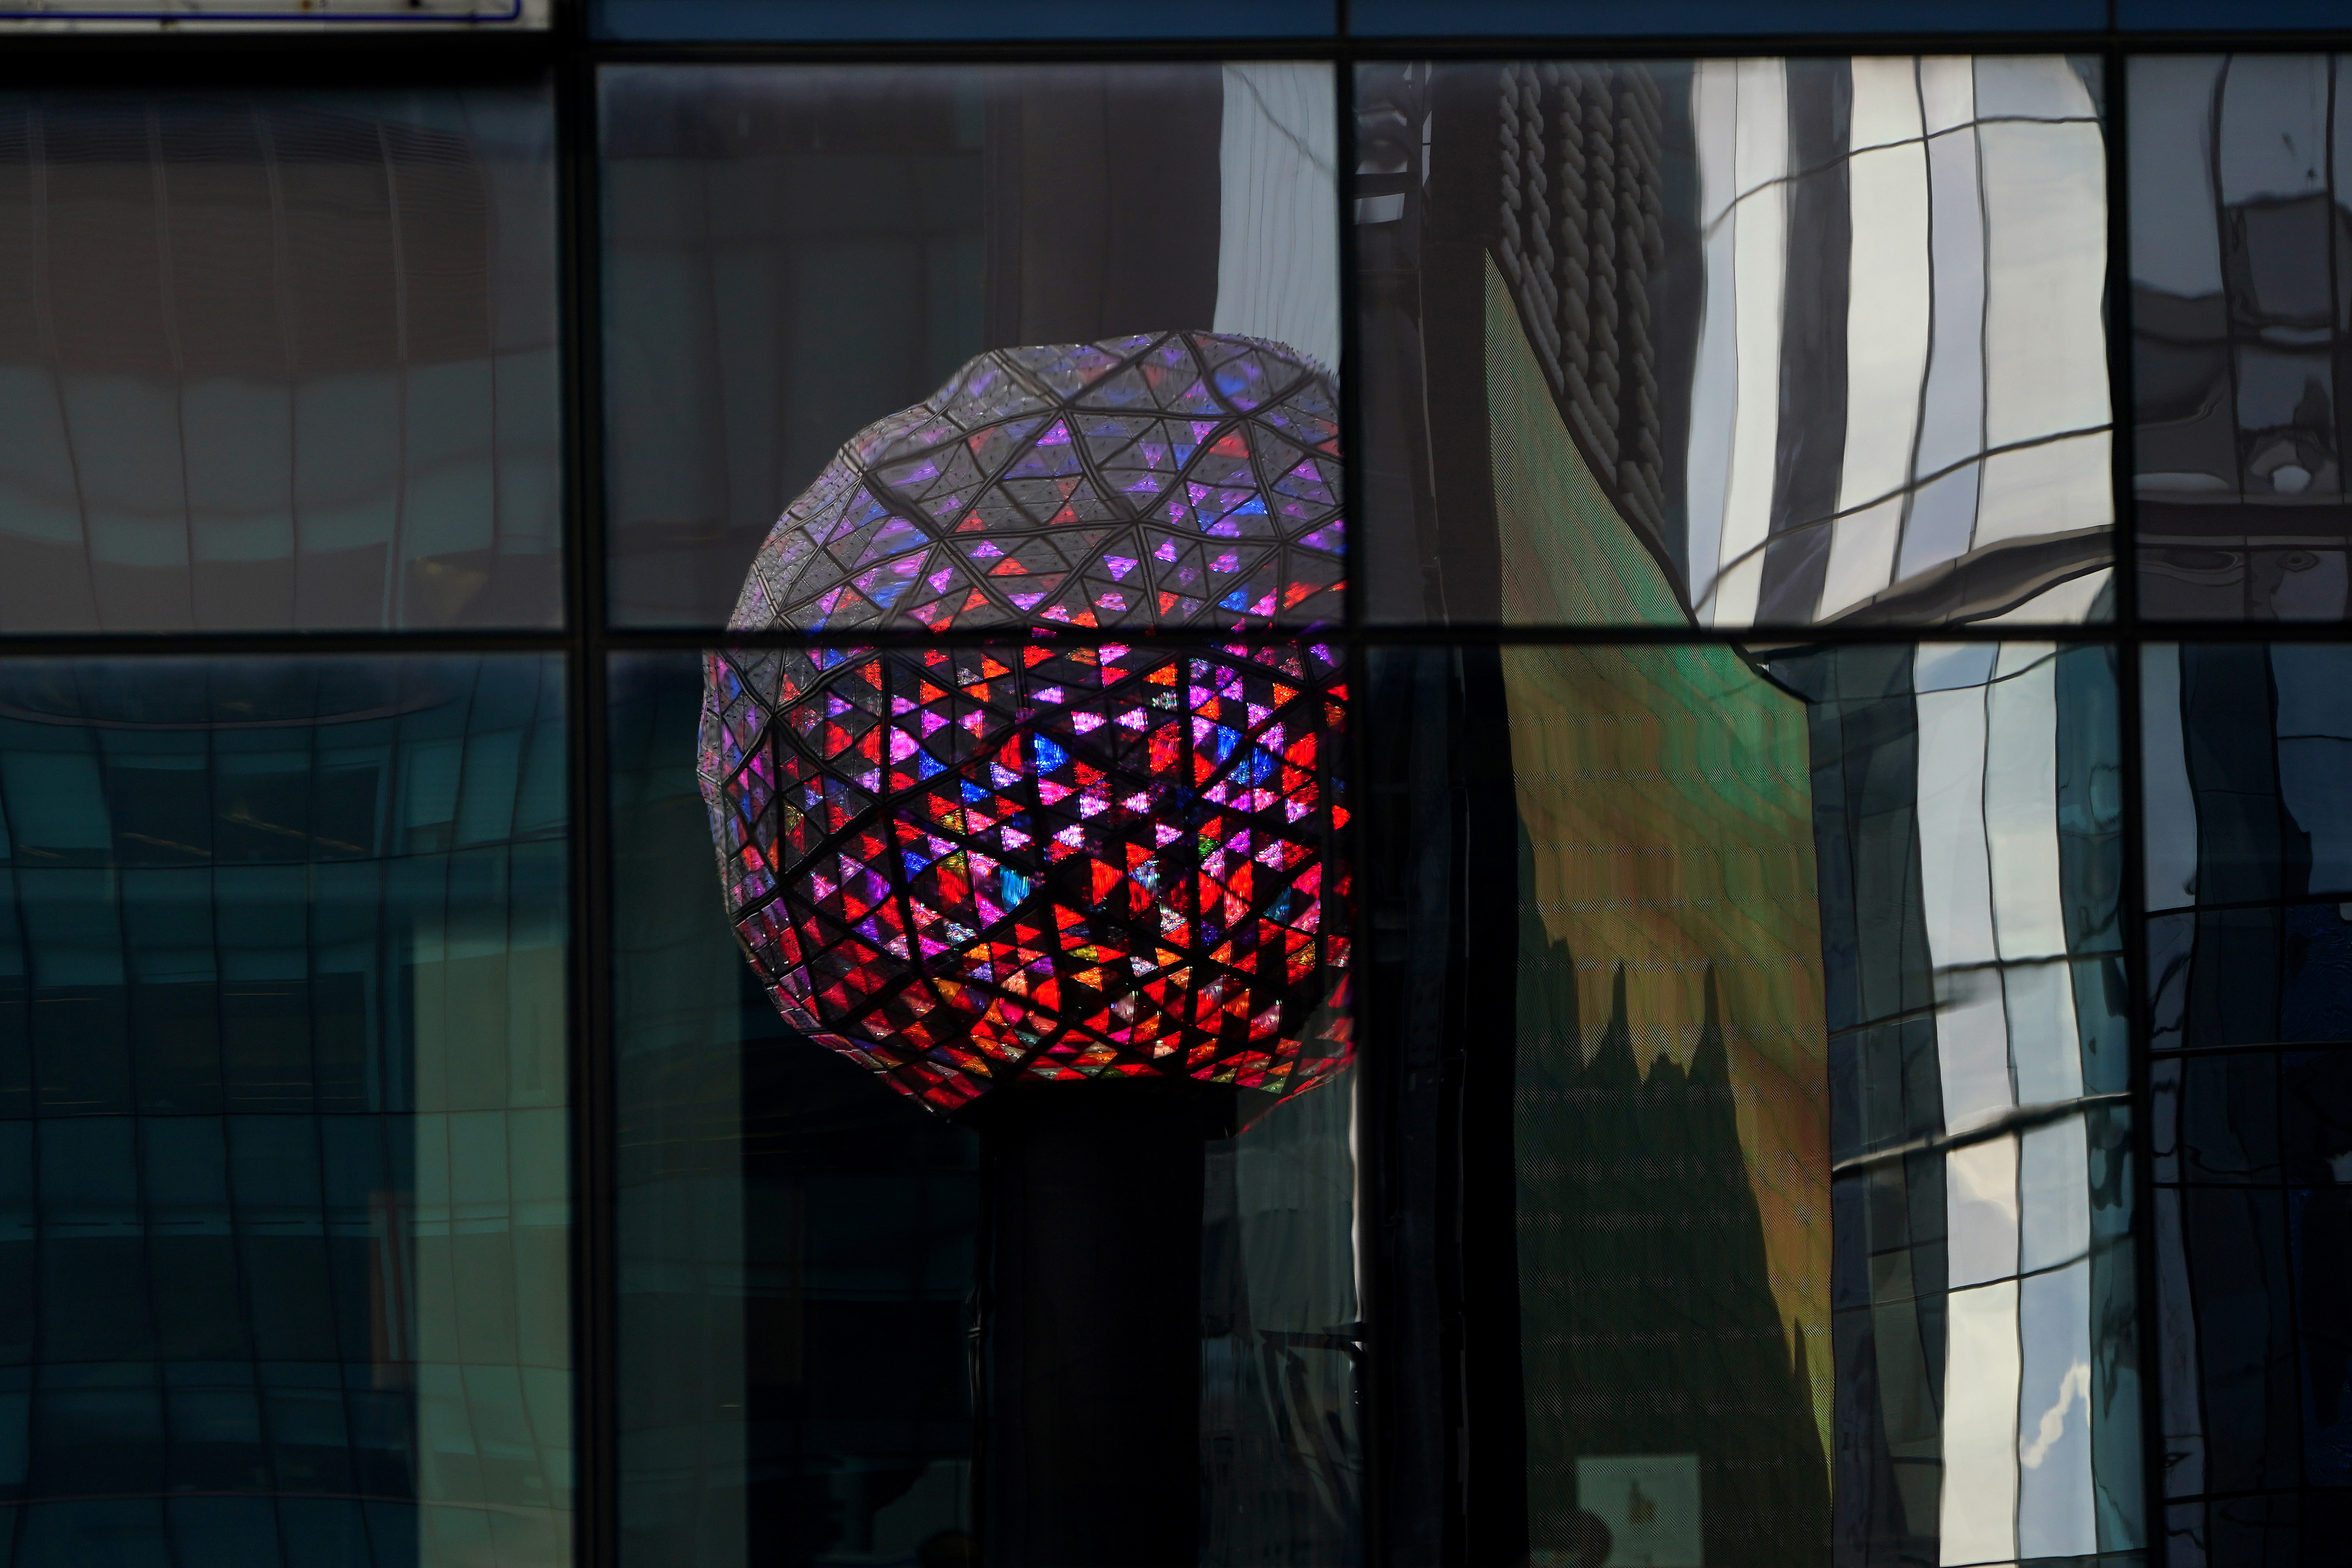 The Times Square ball is reflected in a nearby building as it is tested out for the media ahead of the New Year's celebration in Times Square